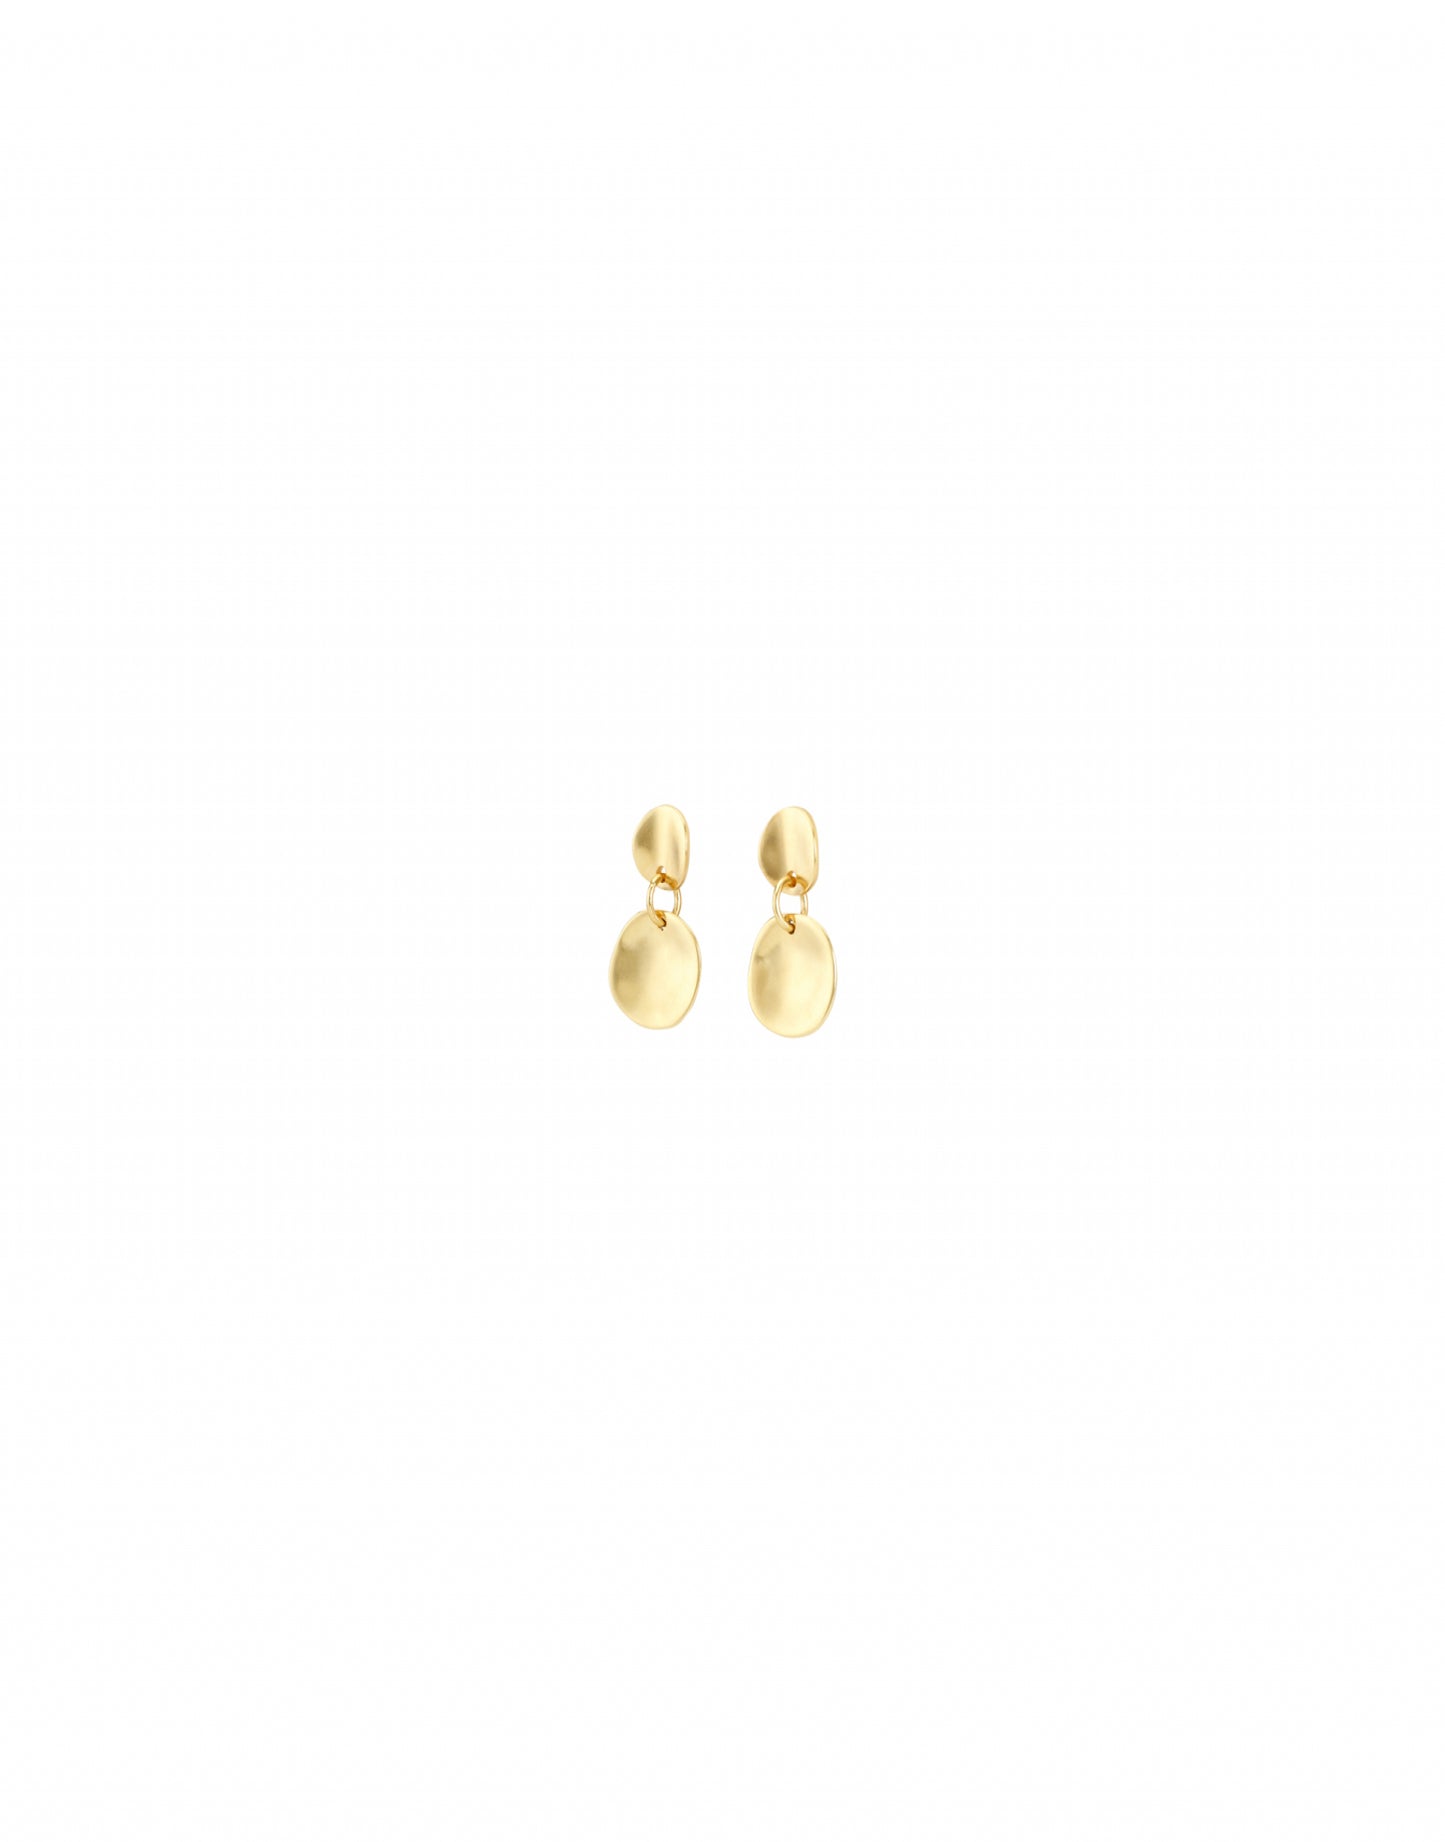 UNO DE 50 UNOde50 - Gold Scales Earrings available at The Good Life Boutique